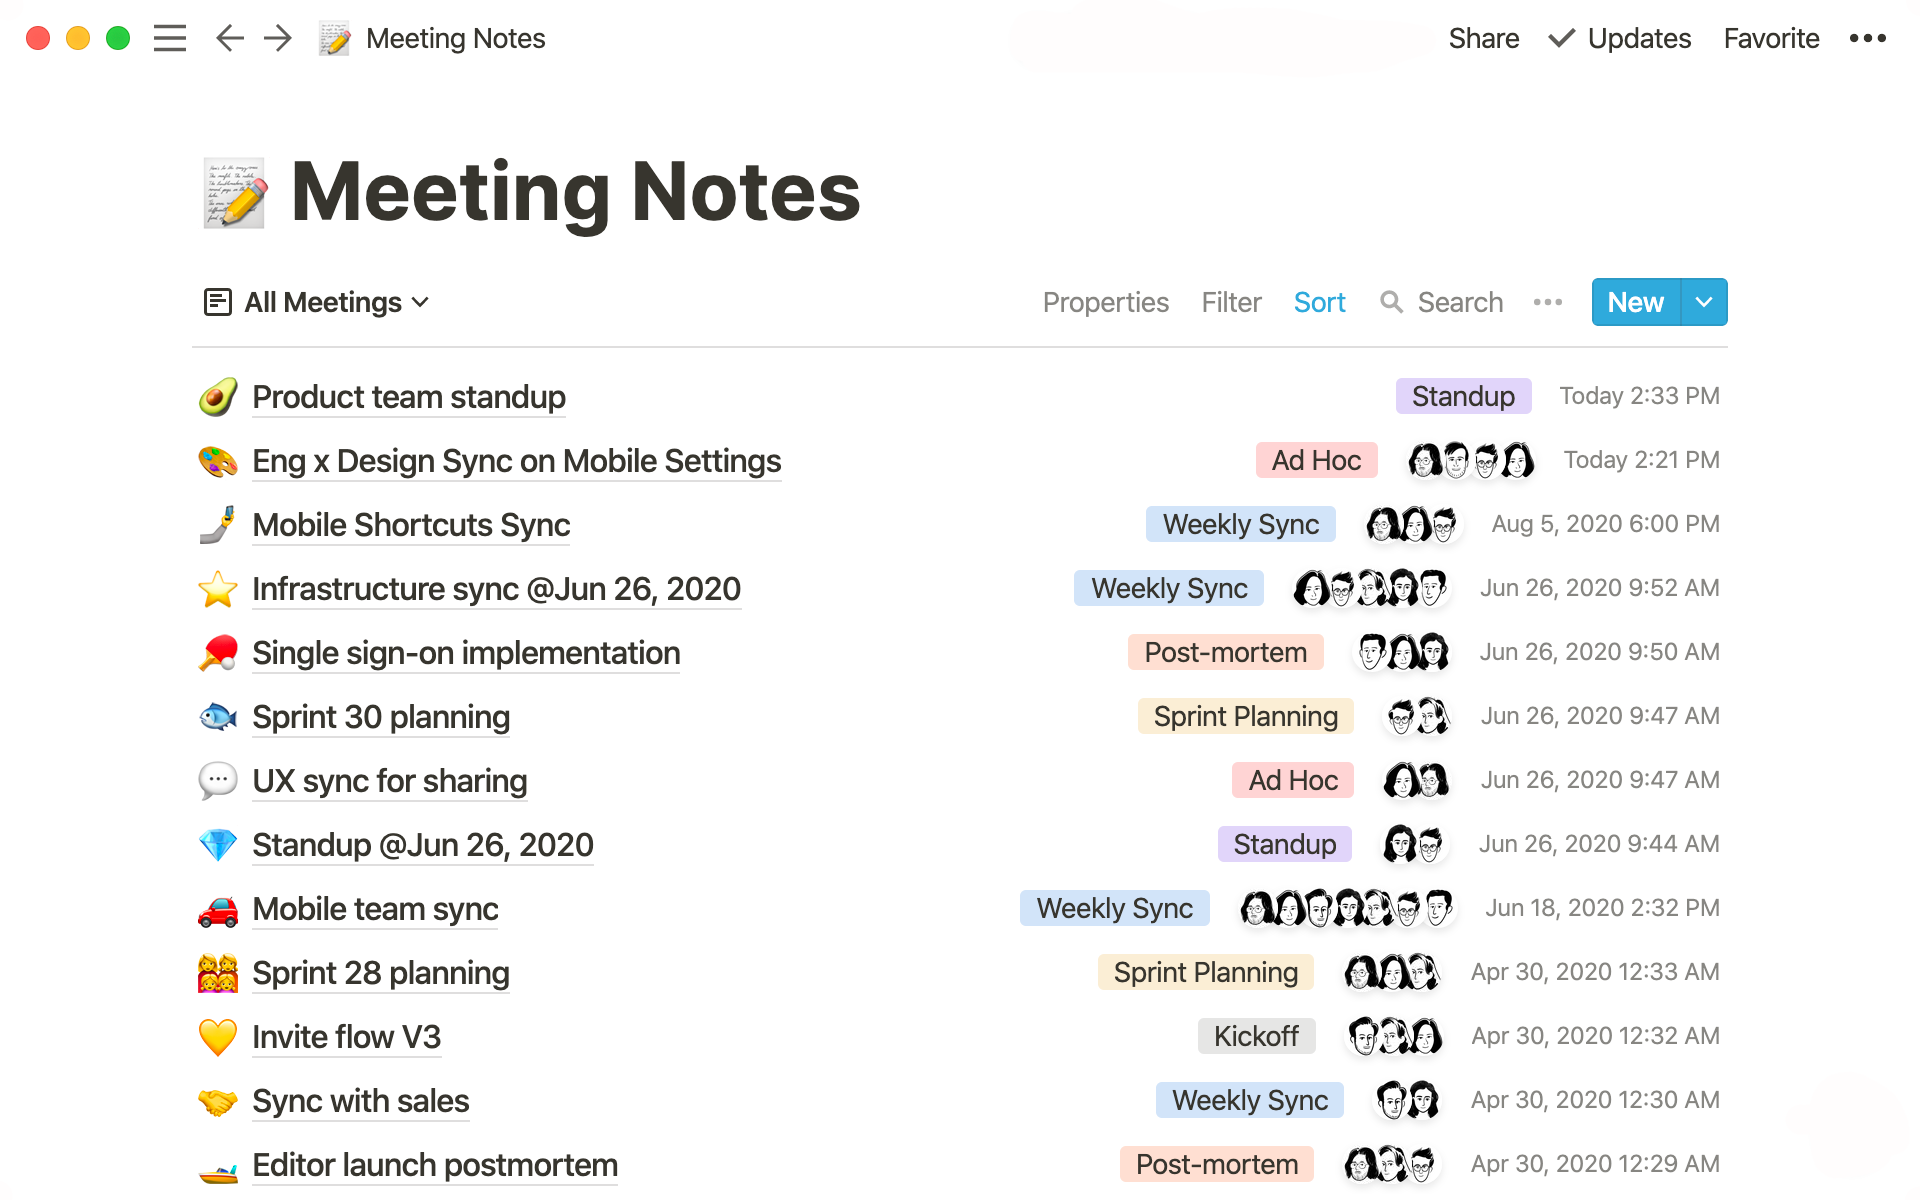 All your product team’s cross-functional meeting notes in one place.